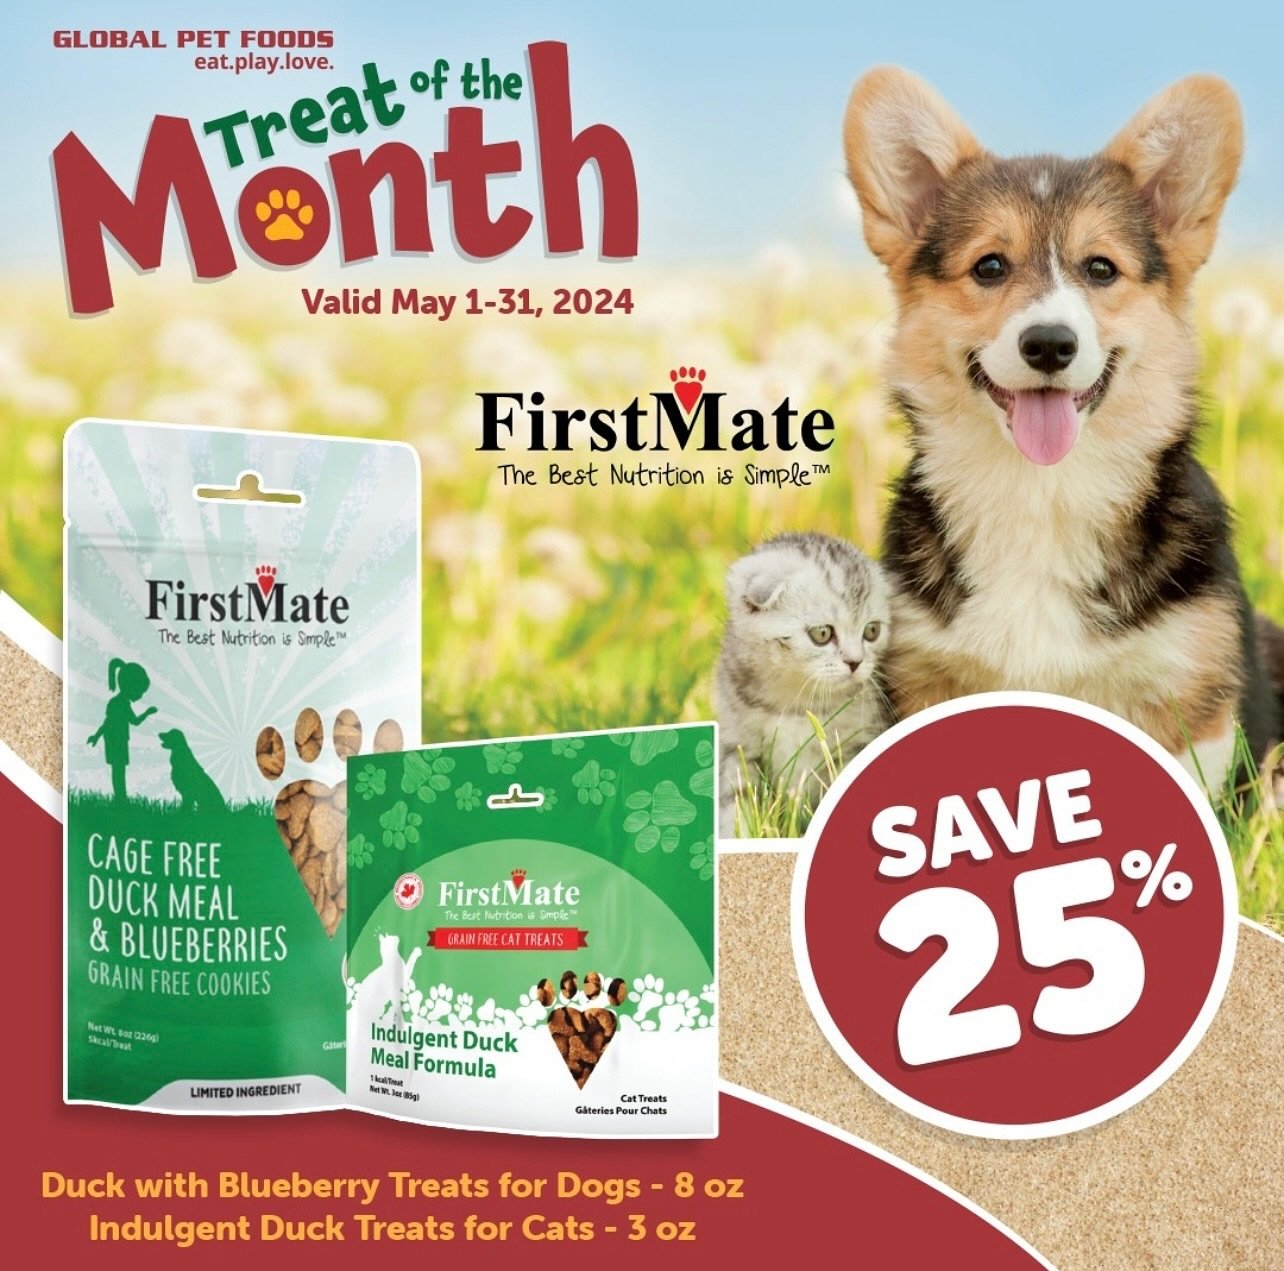 🐶🐱🎉 It&rsquo;s that time again! Discover the deliciousness of our newest Treat of the Month for May! 🌼🍃 Enjoy 25% off on FirstMate Duck with Blueberry Treats for Dogs, 8 oz and Indulgent Duck Treats for Cats, 3 oz. Your furry friends will thank 